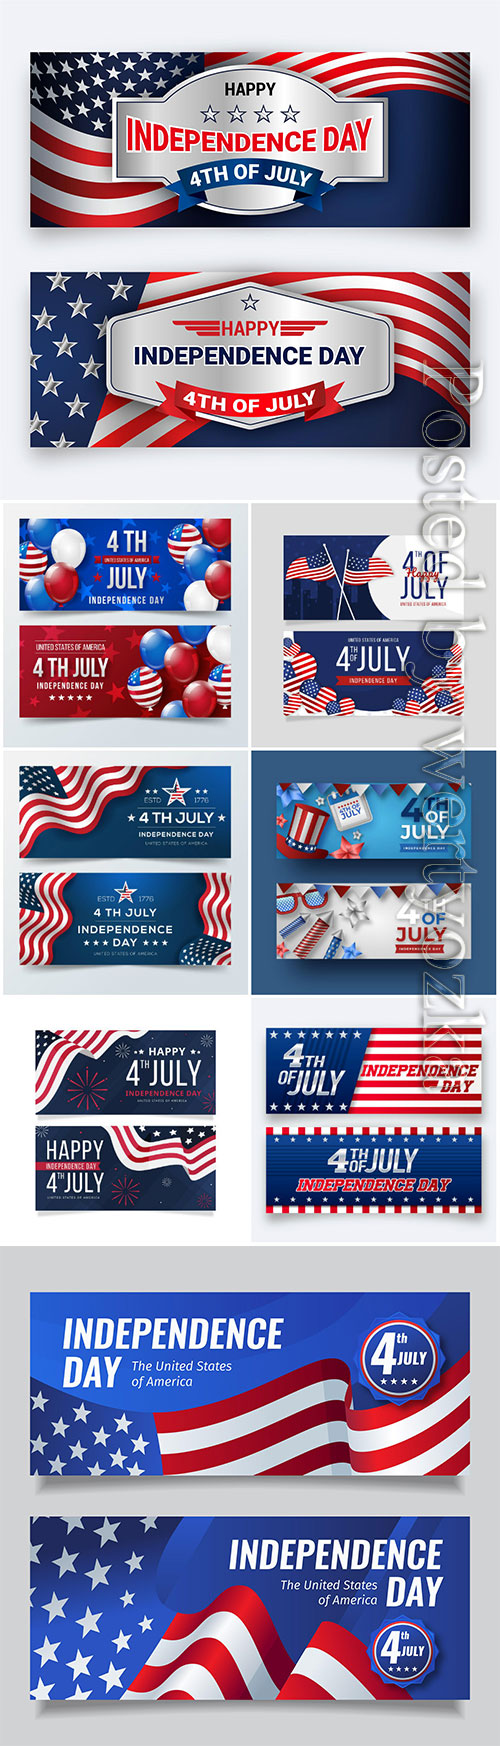 Independence day banners vector set